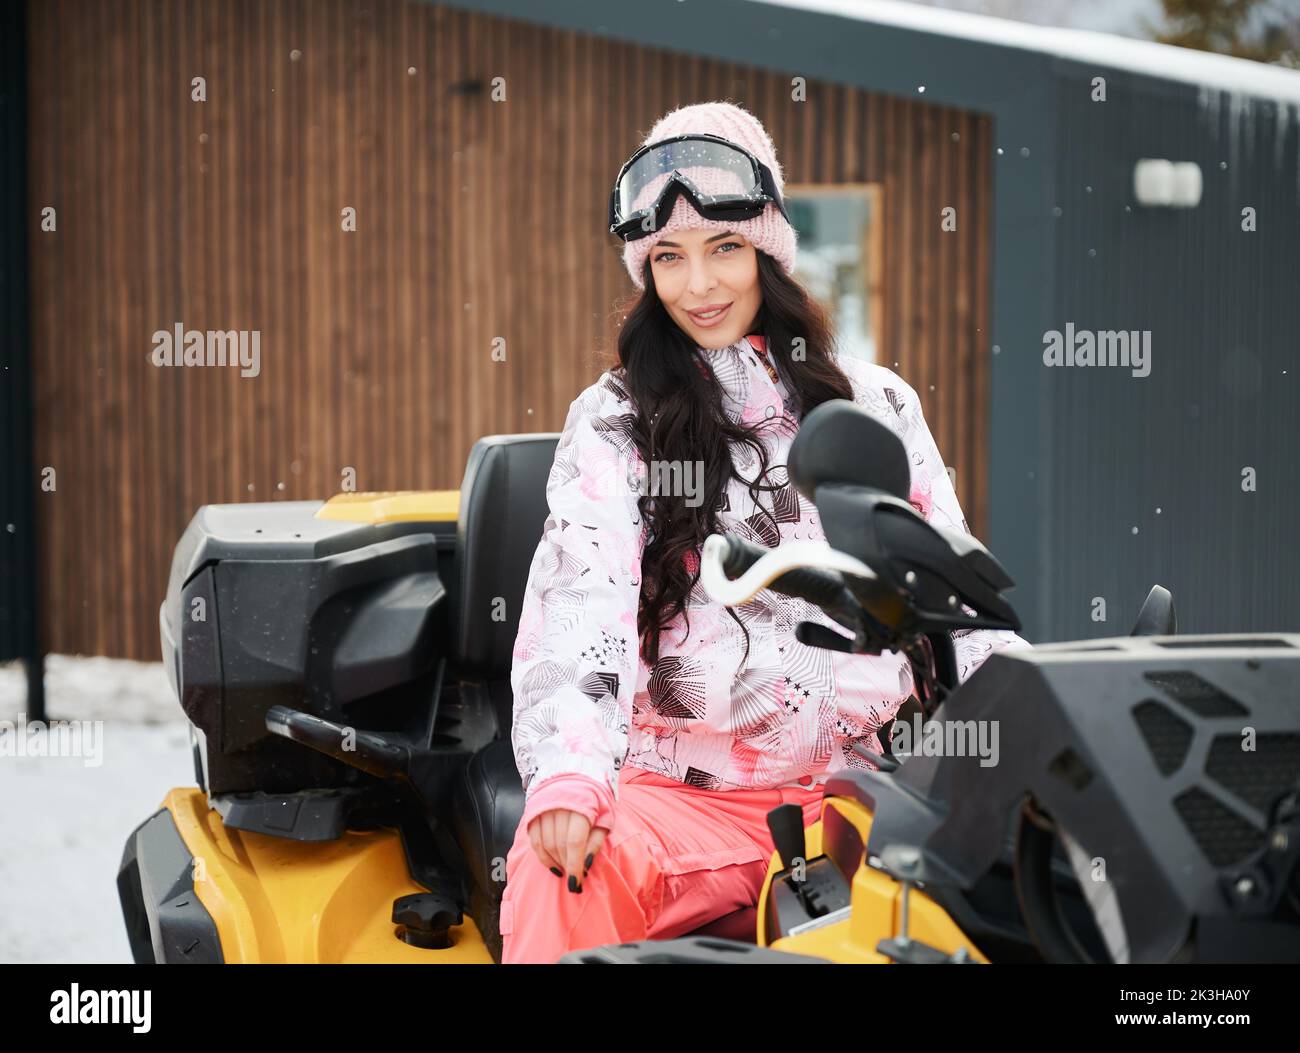 Portrait of beautiful woman posing on offroad four-wheeler ATV with wooden house on background. Concept of active leisure and winter activities. Stock Photo